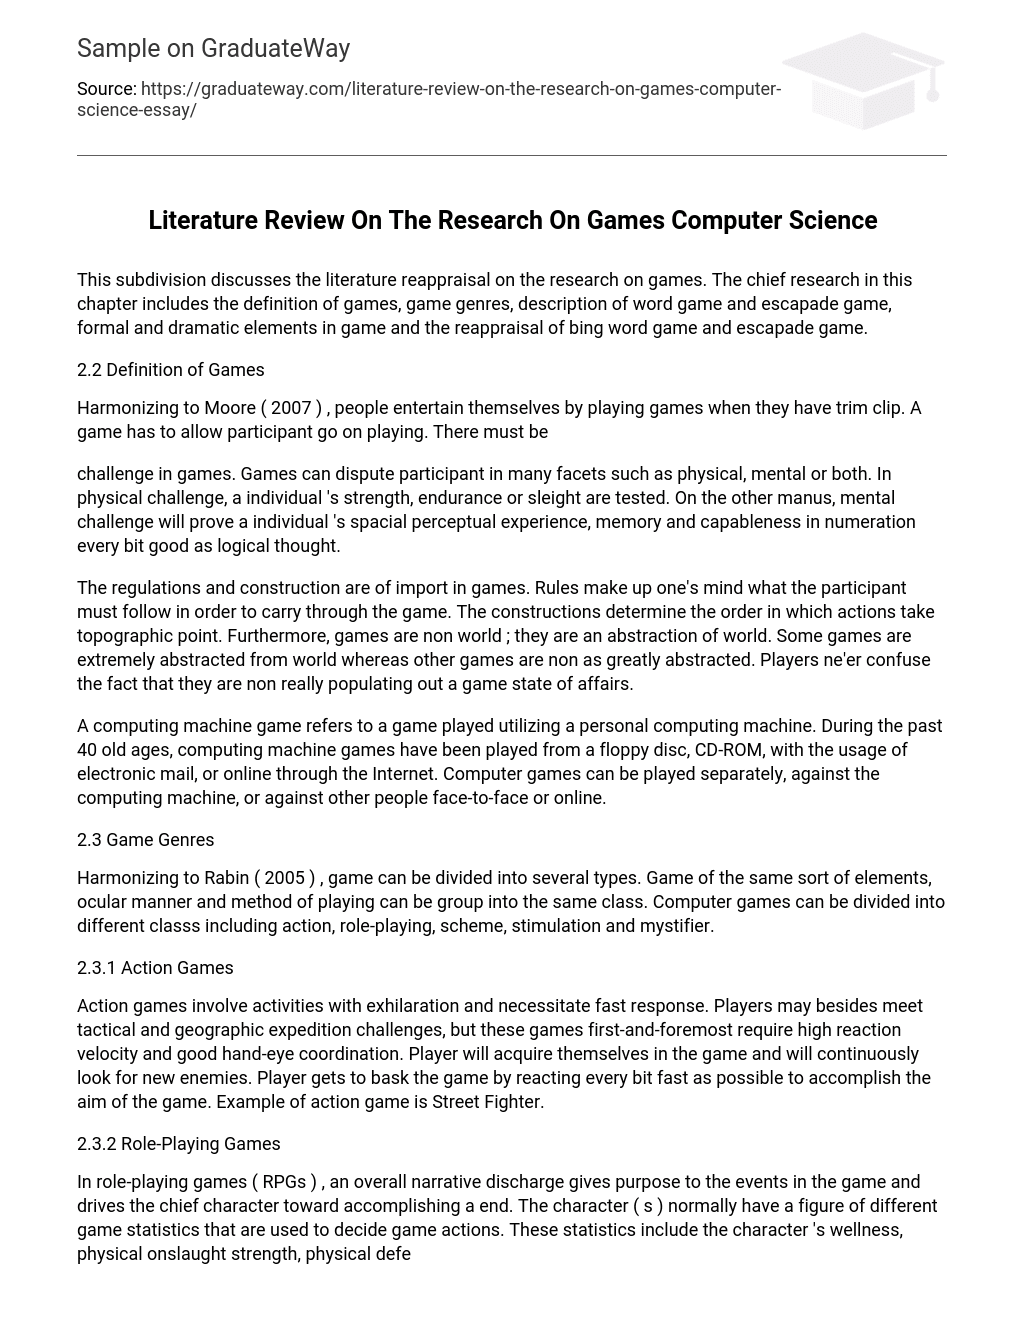 Literature Review On The Research On Games Computer Science